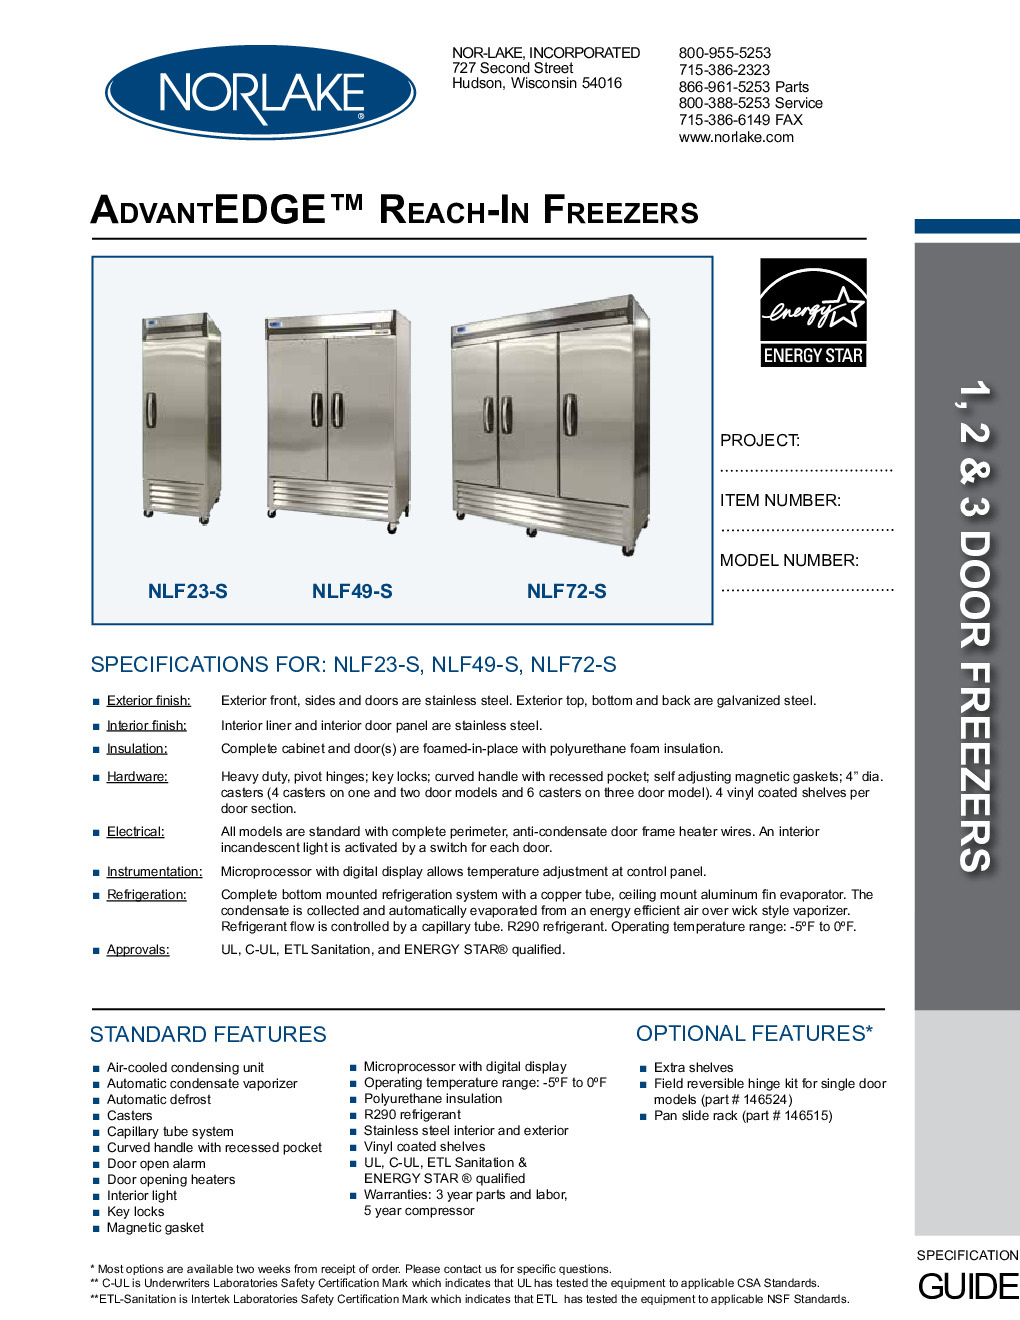 Nor-Lake NLF72-S Reach-In Freezer